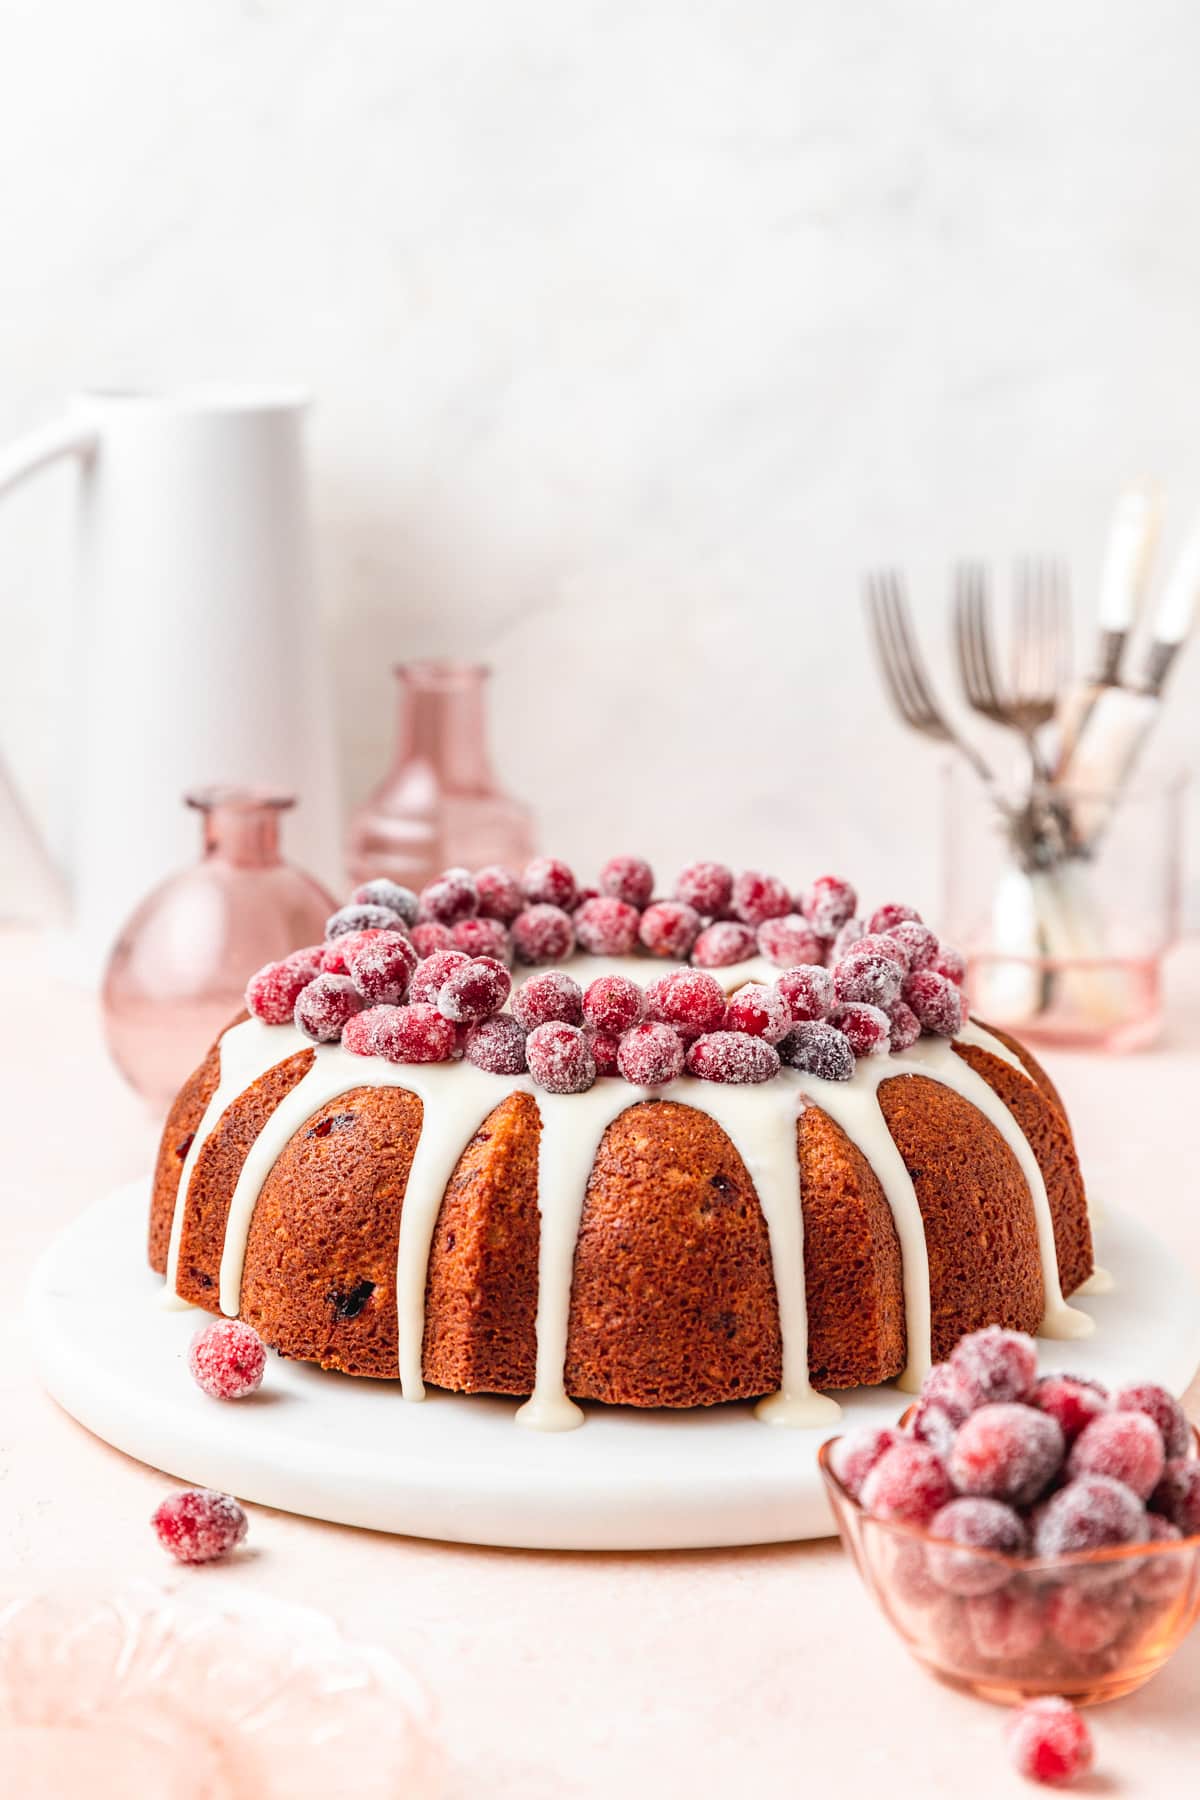 cranberry bundt cake with sugared cranberries on top.